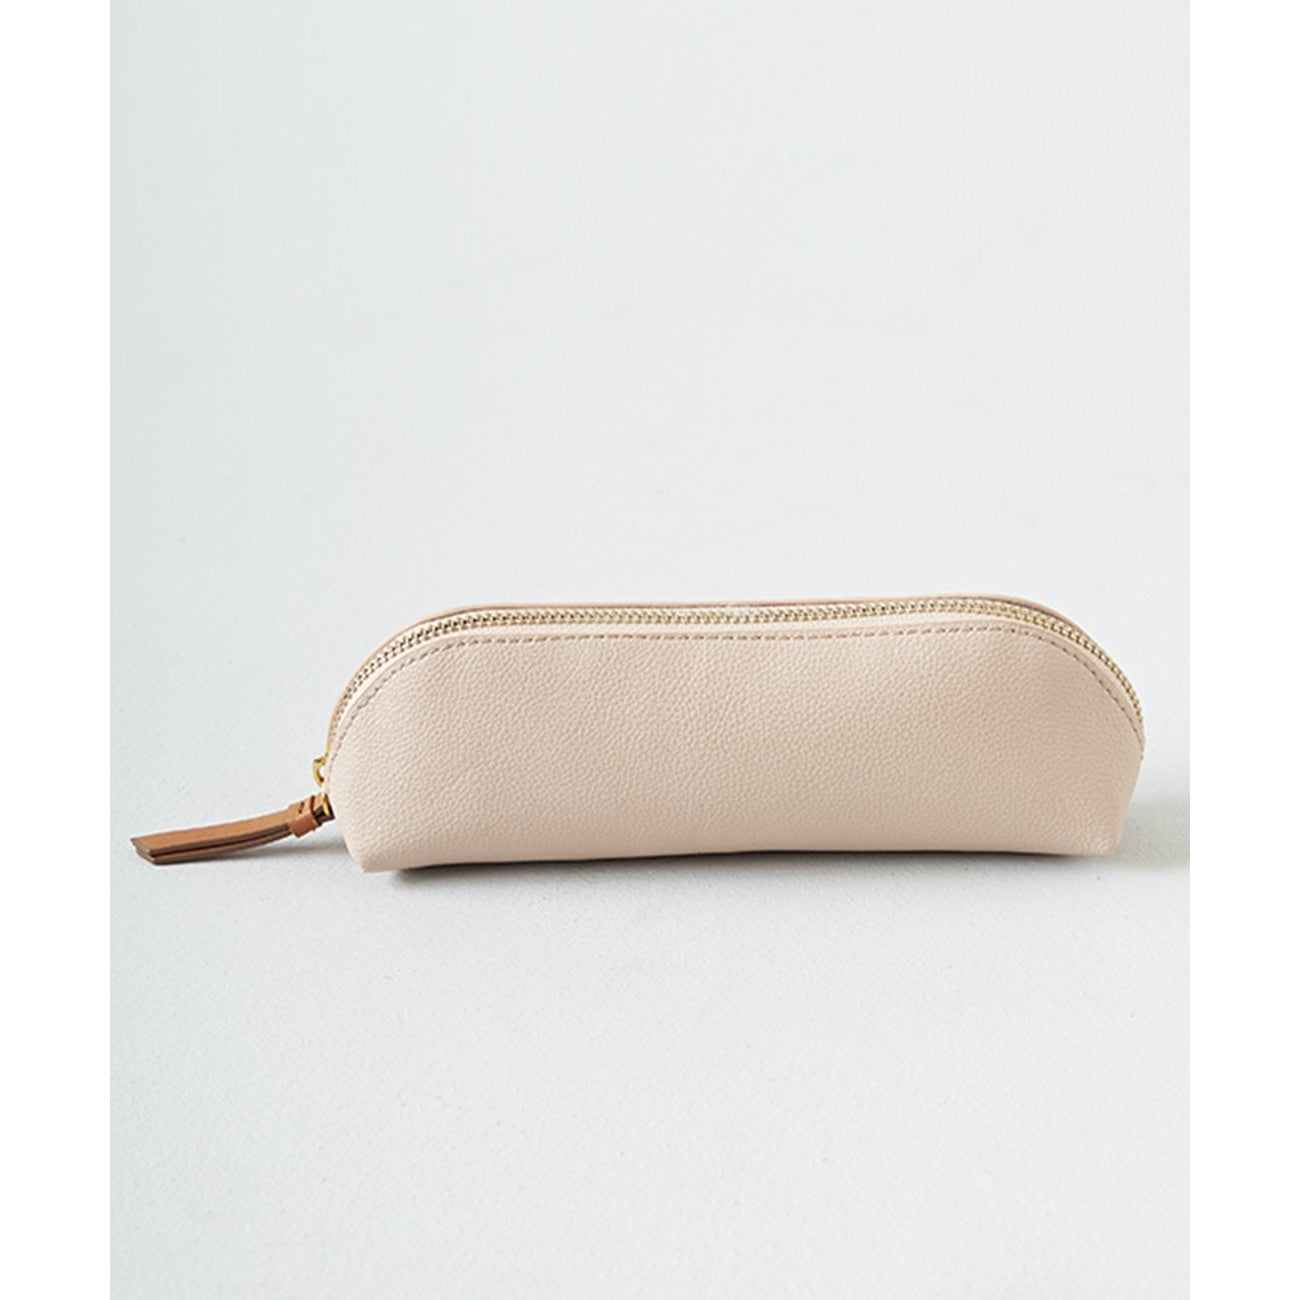 Vessel Vegan Leather Cosmetic and Pencil Case - Grey and Blush